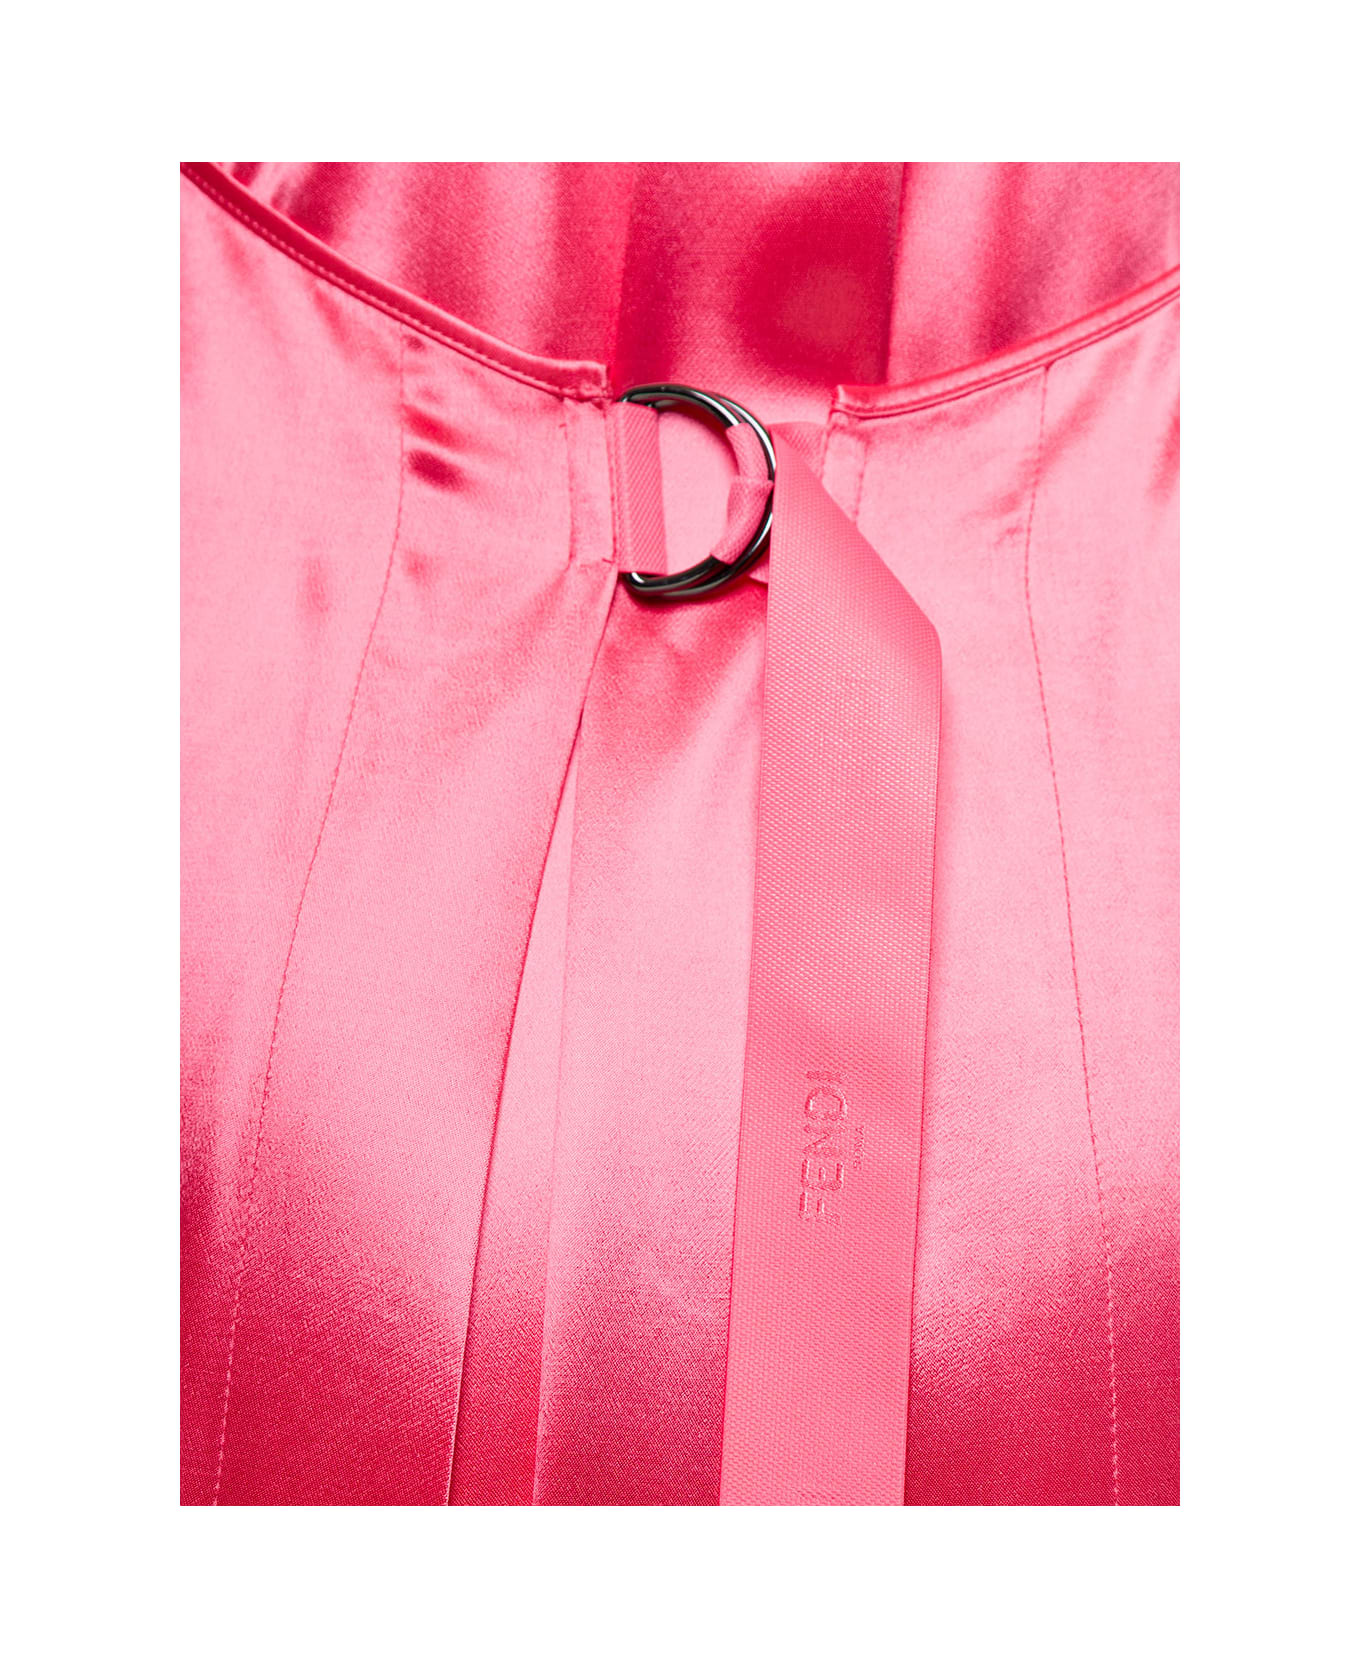 Fendi Maxi Pink Dress With Halter Neck Cut In The Back And Logo Ribbons In Viscose Satin Woman - Red